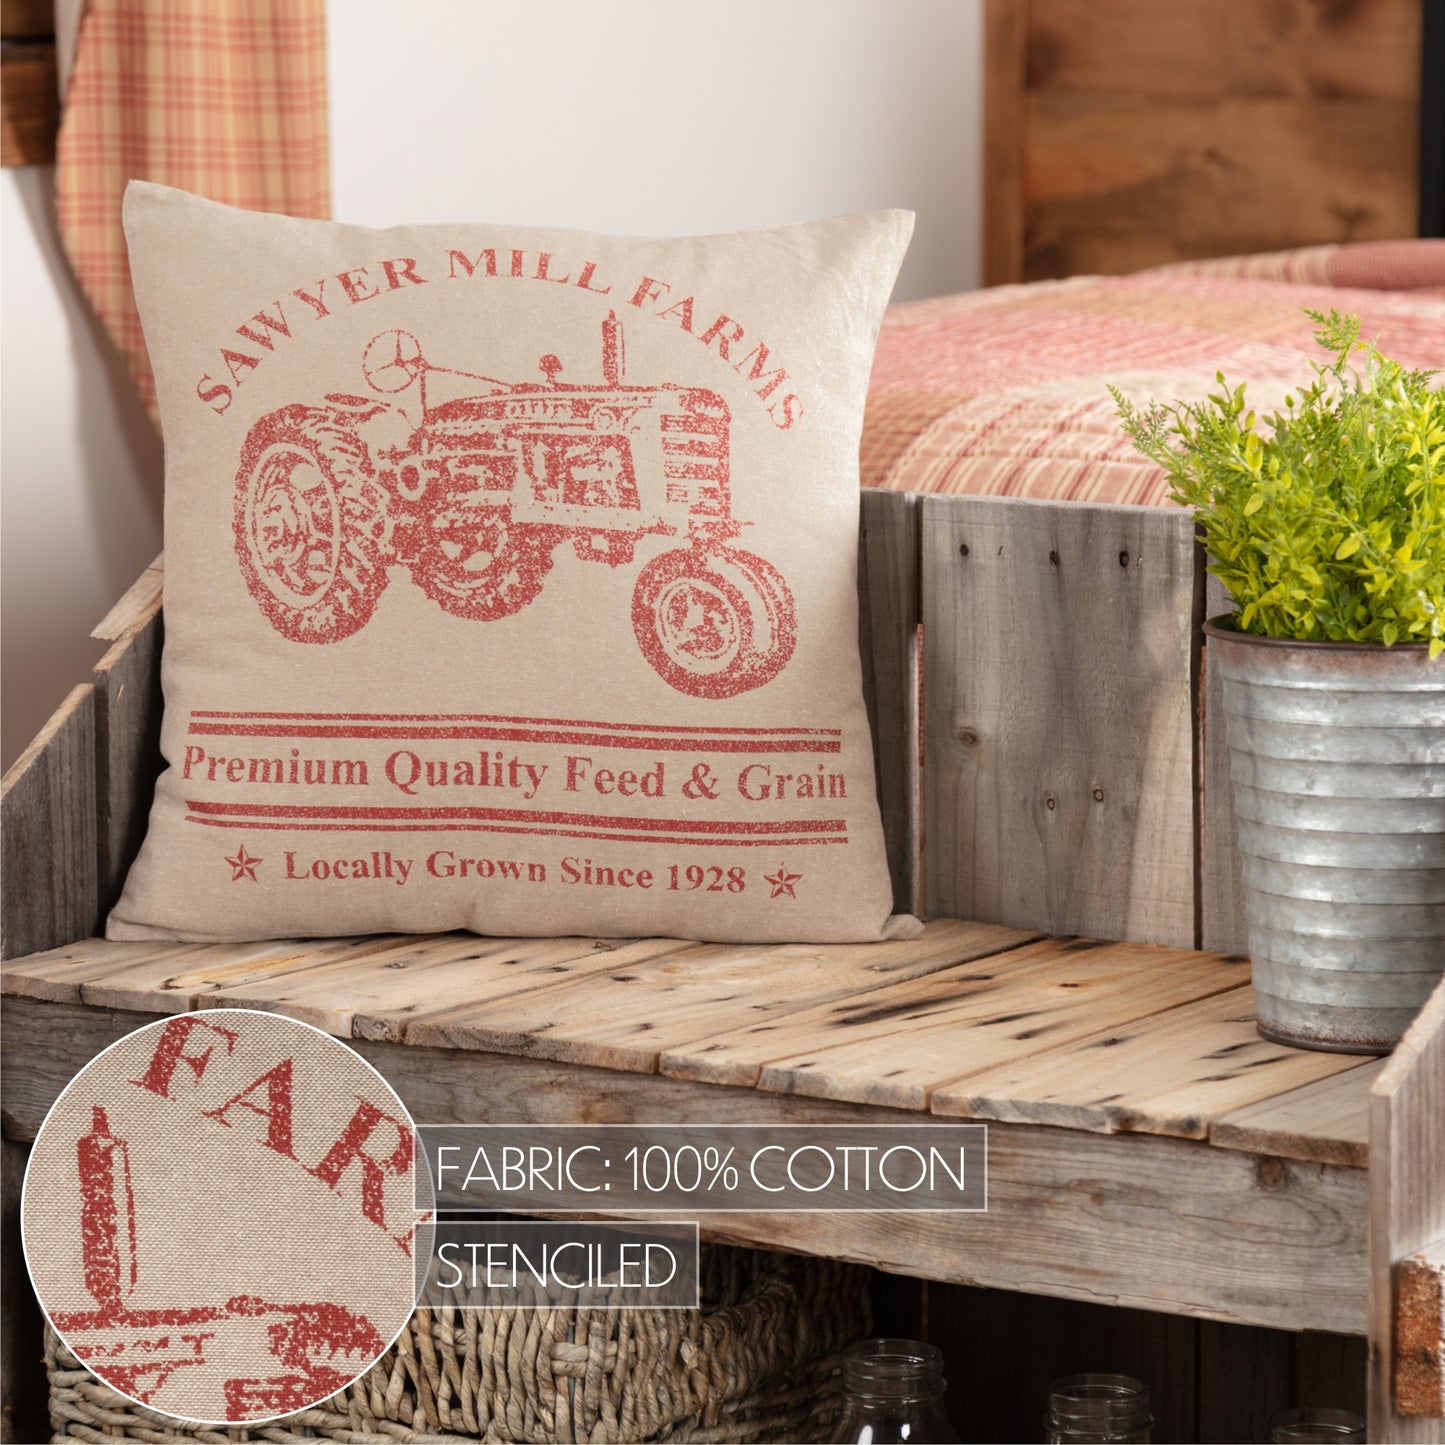 51325-Sawyer-Mill-Red-Tractor-Pillow-18x18-image-2